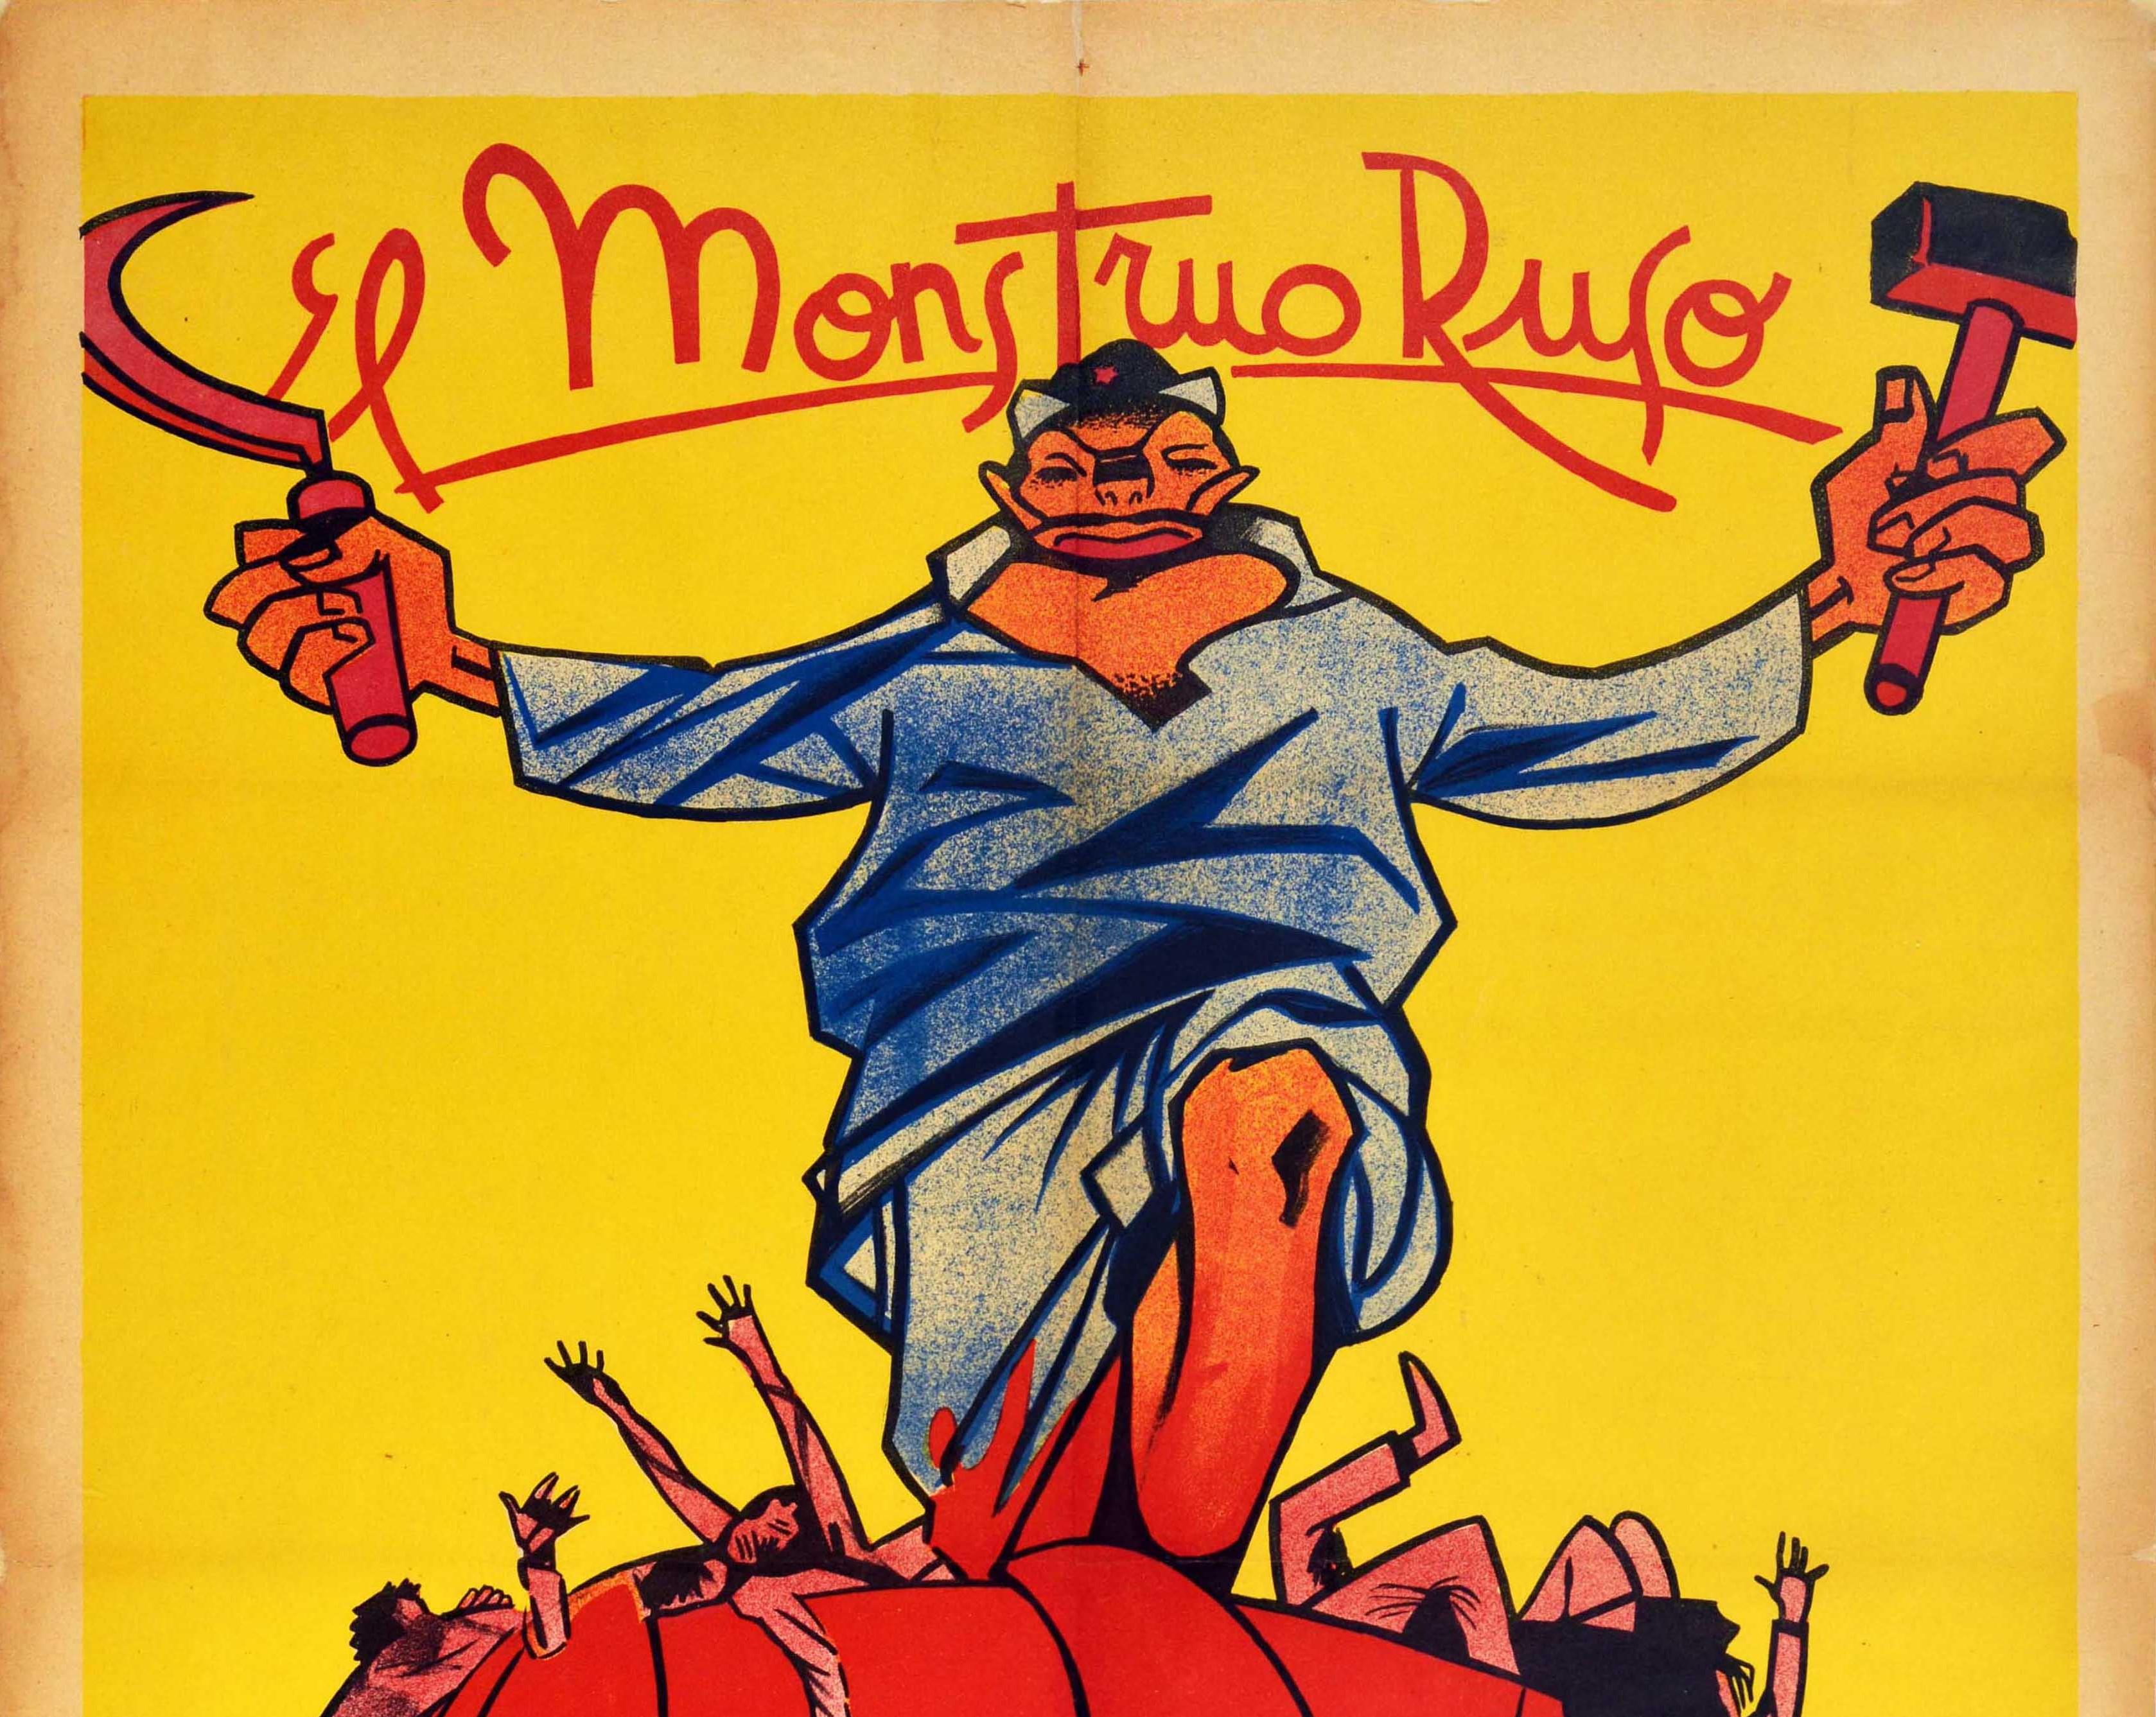 Original Vintage Spanish Civil War Poster El Monstruo Ruso The Russian Monster - Print by Unknown